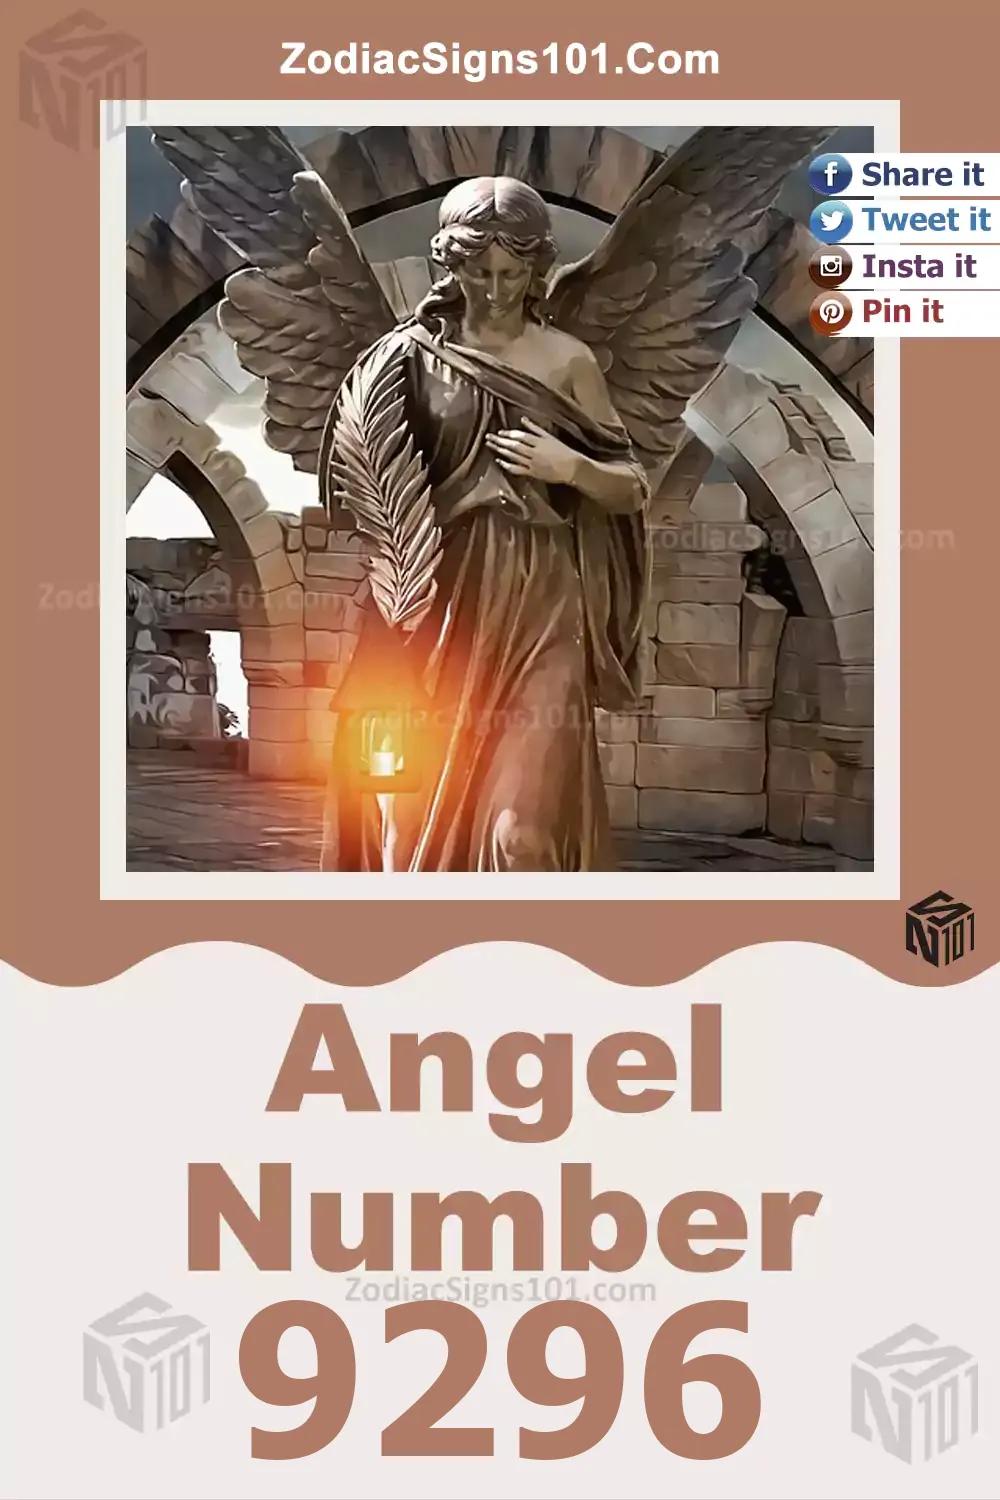 9296 Angel Number Meaning